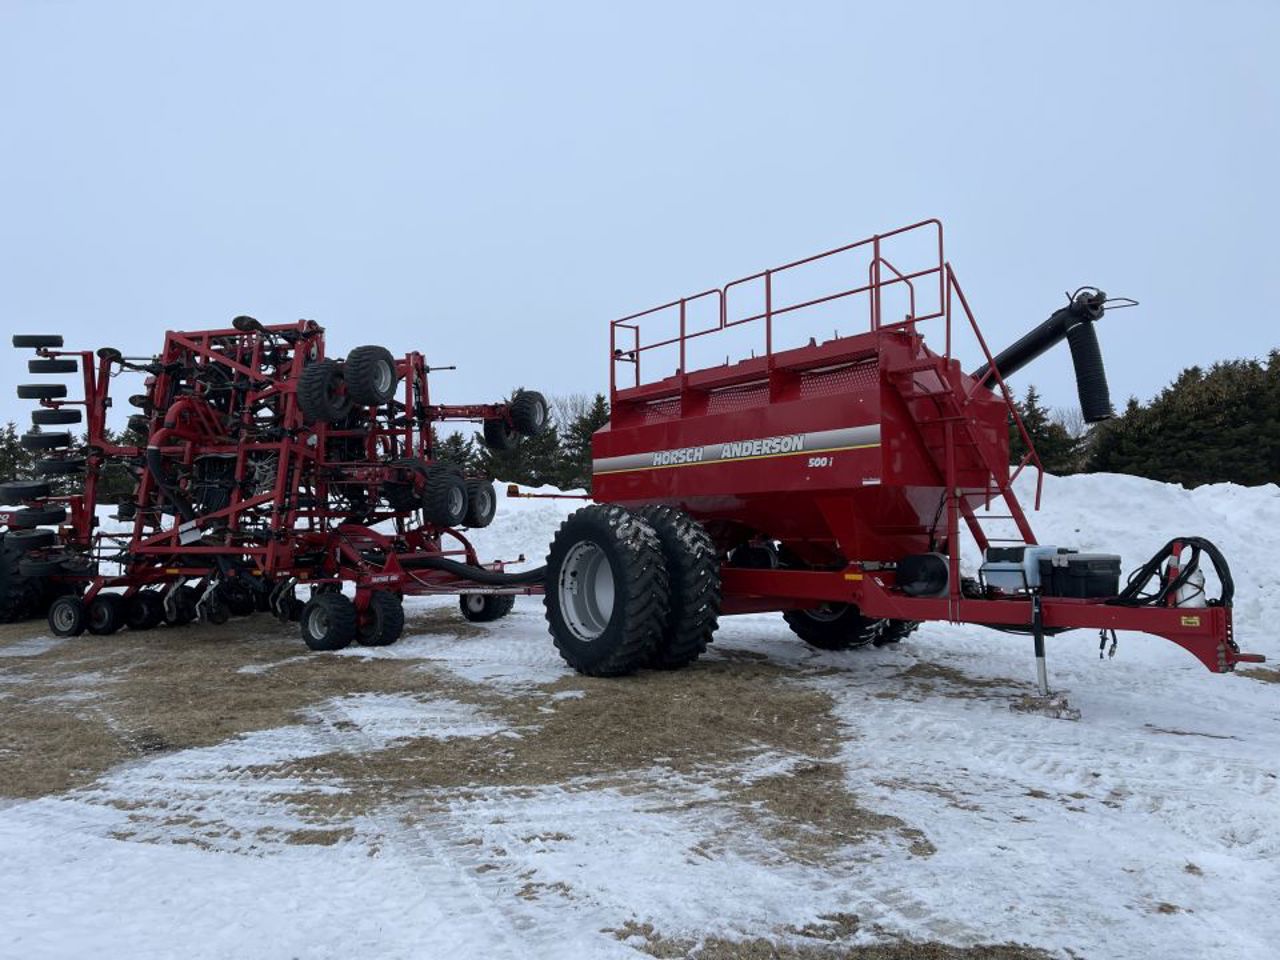 #6 - 2012 Horsch Anderson Panther 460